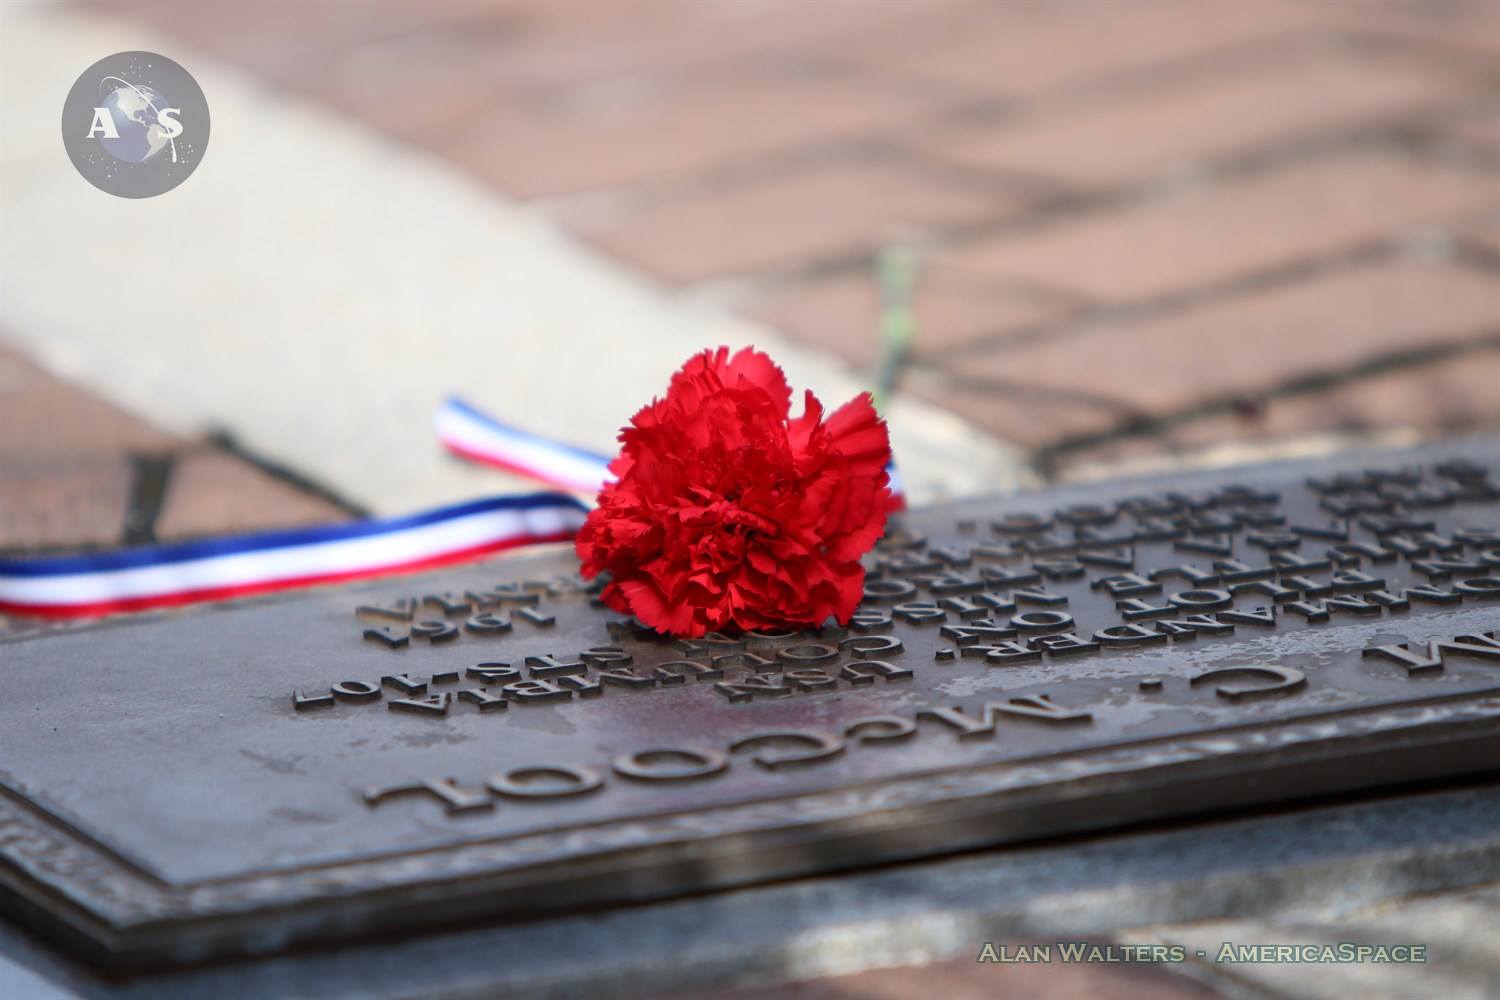 A single carnation decorates William McCool's plaque, who lost his life when Columbia broke up upon reentry in Feb. 2003. Photo Credit: Alan Walters / AmericaSpace